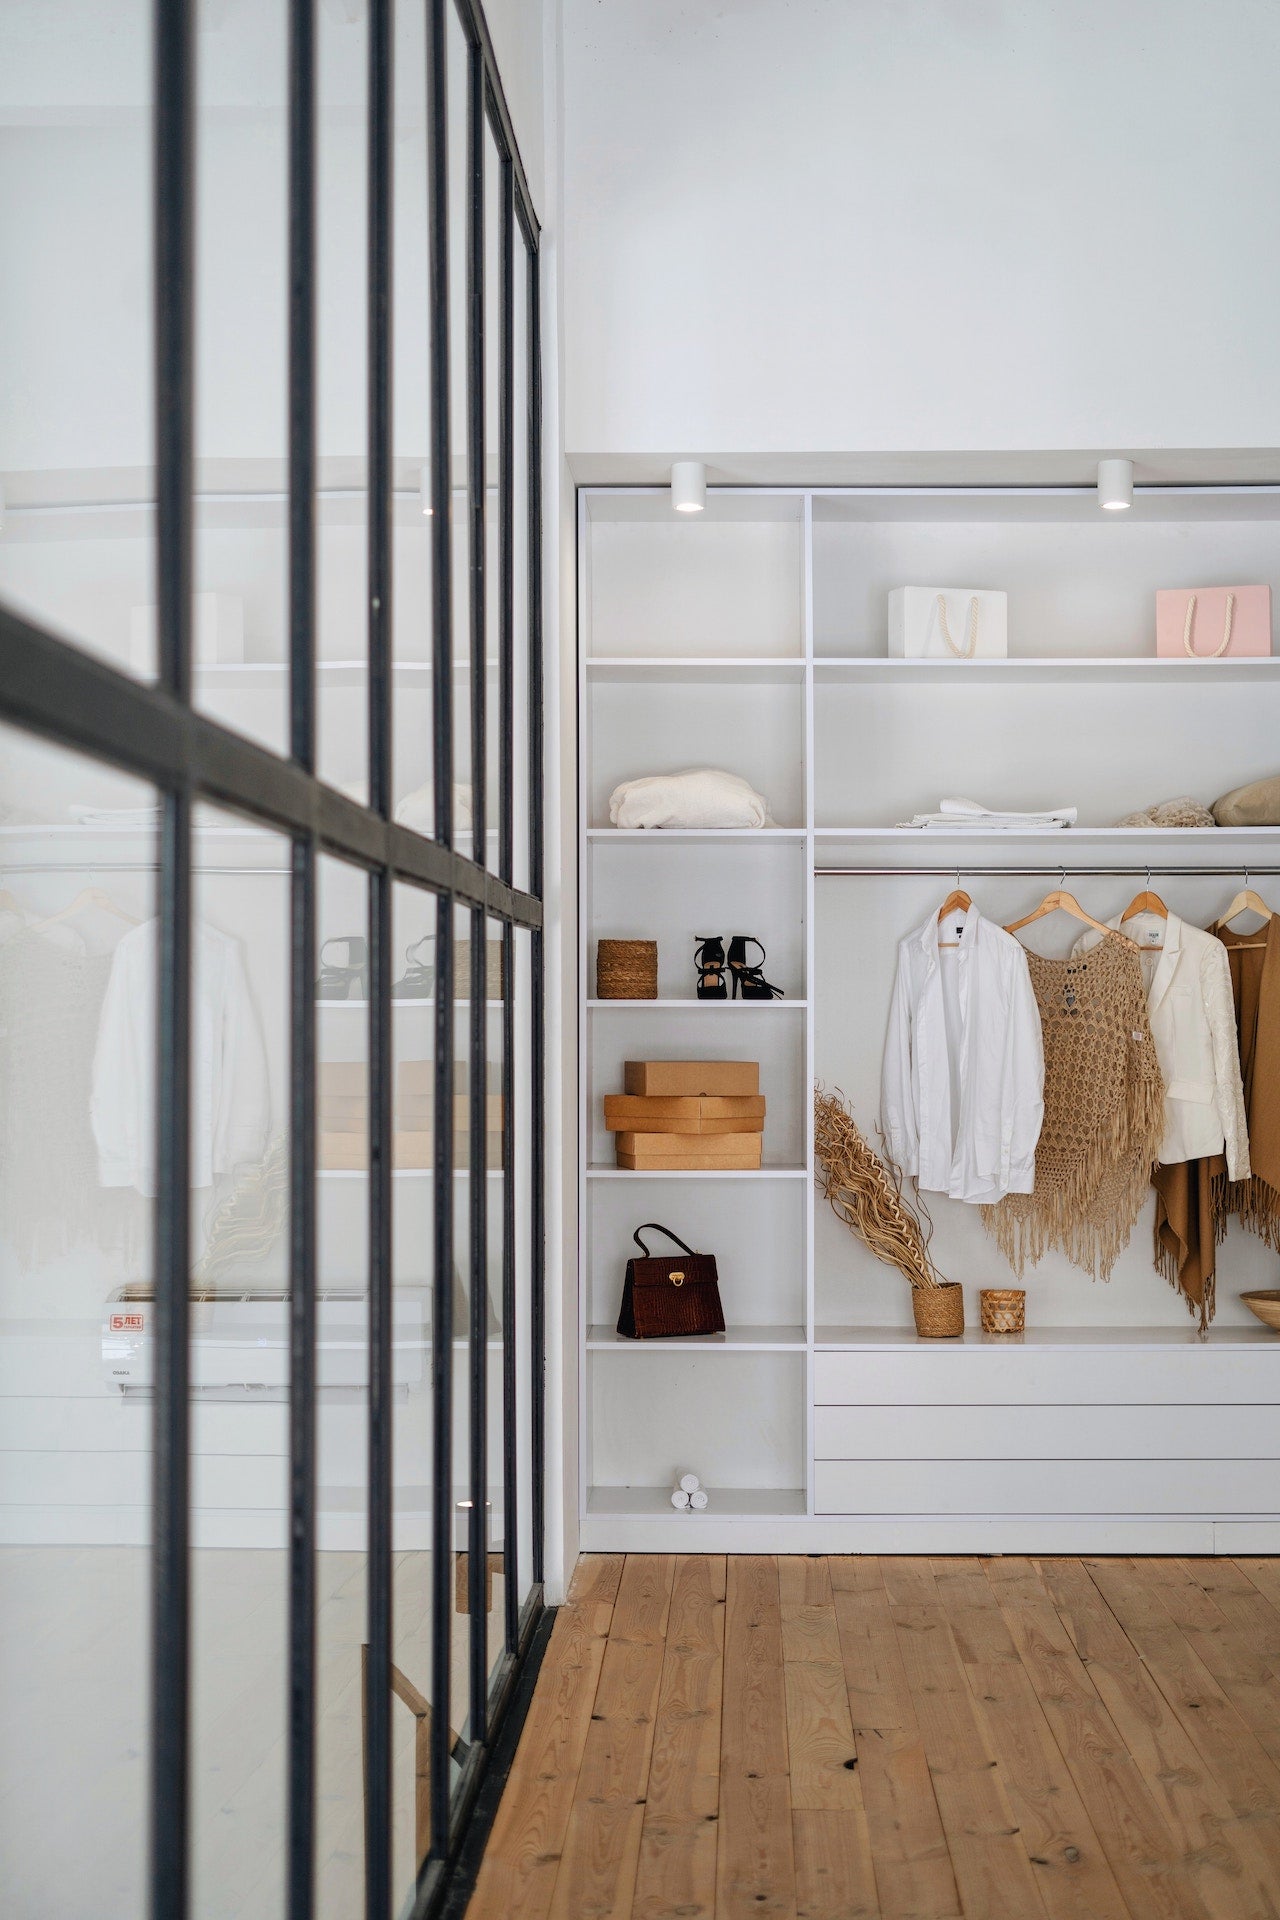 Closet Clearing - Simple Steps To Start Your Organizing Journey The KonMari Way